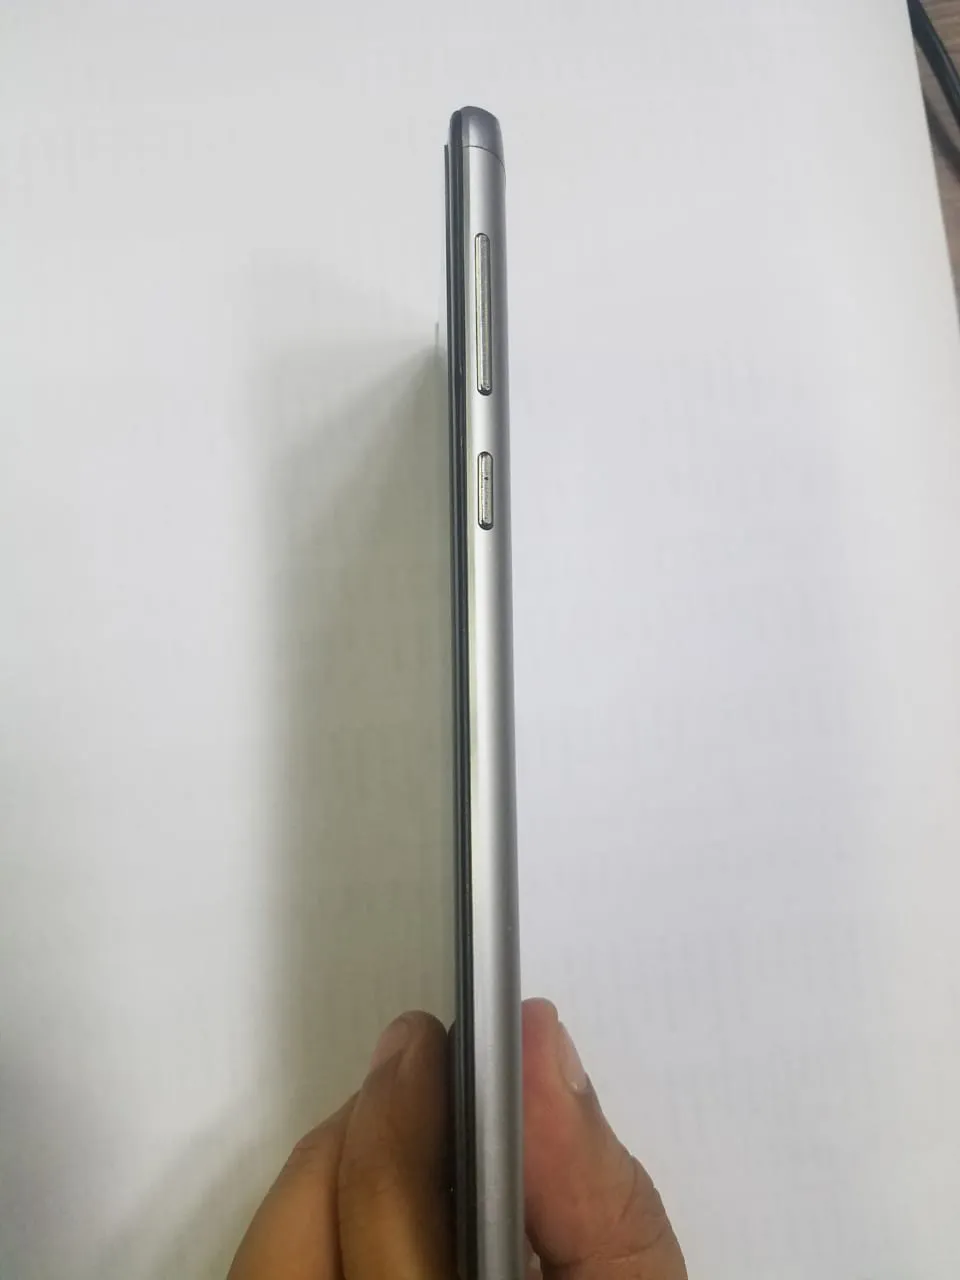 honor 6x gaurnteed non repaired condition 10/10 - photo 3